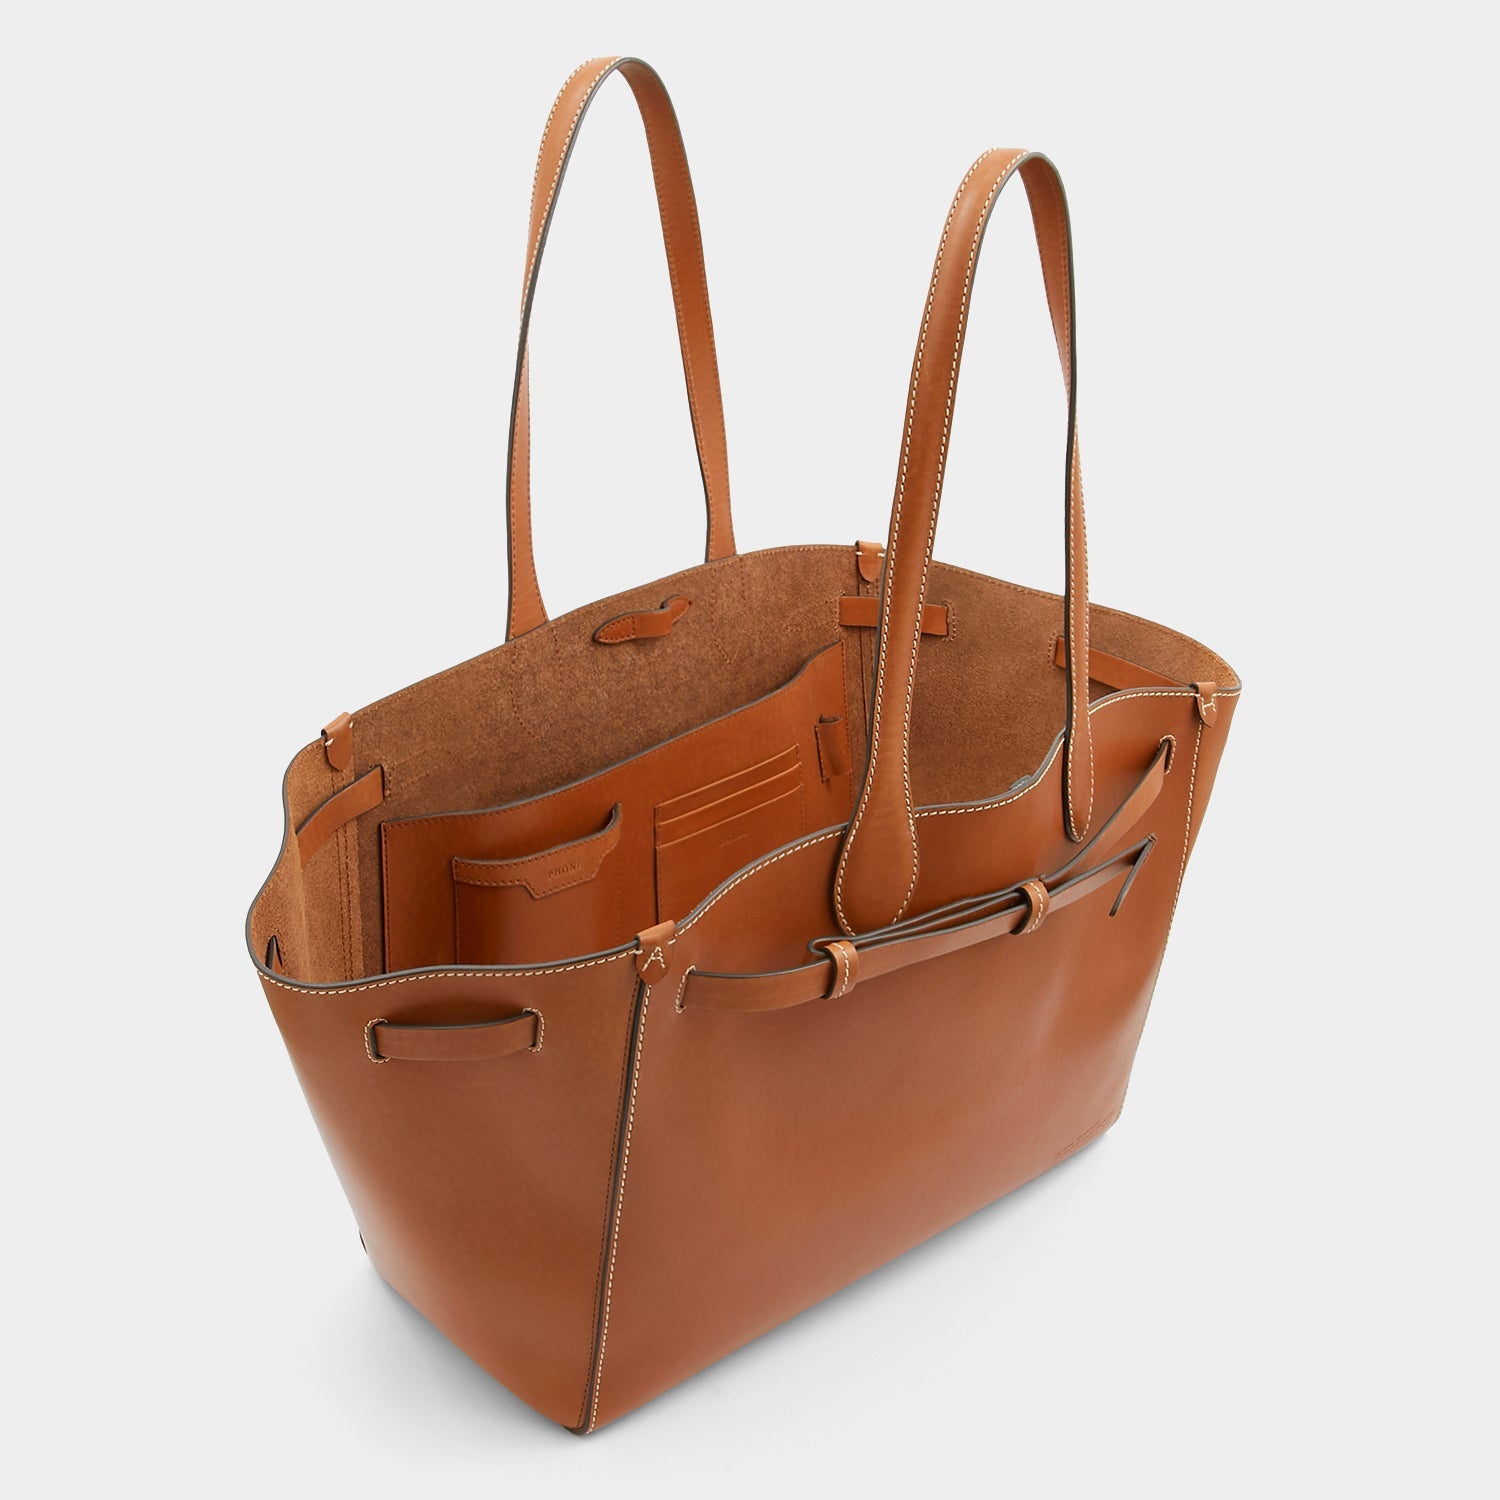 Return to Nature Tote -

                  
                    Compostable Leather in Tan -
                  

                  Anya Hindmarch US
